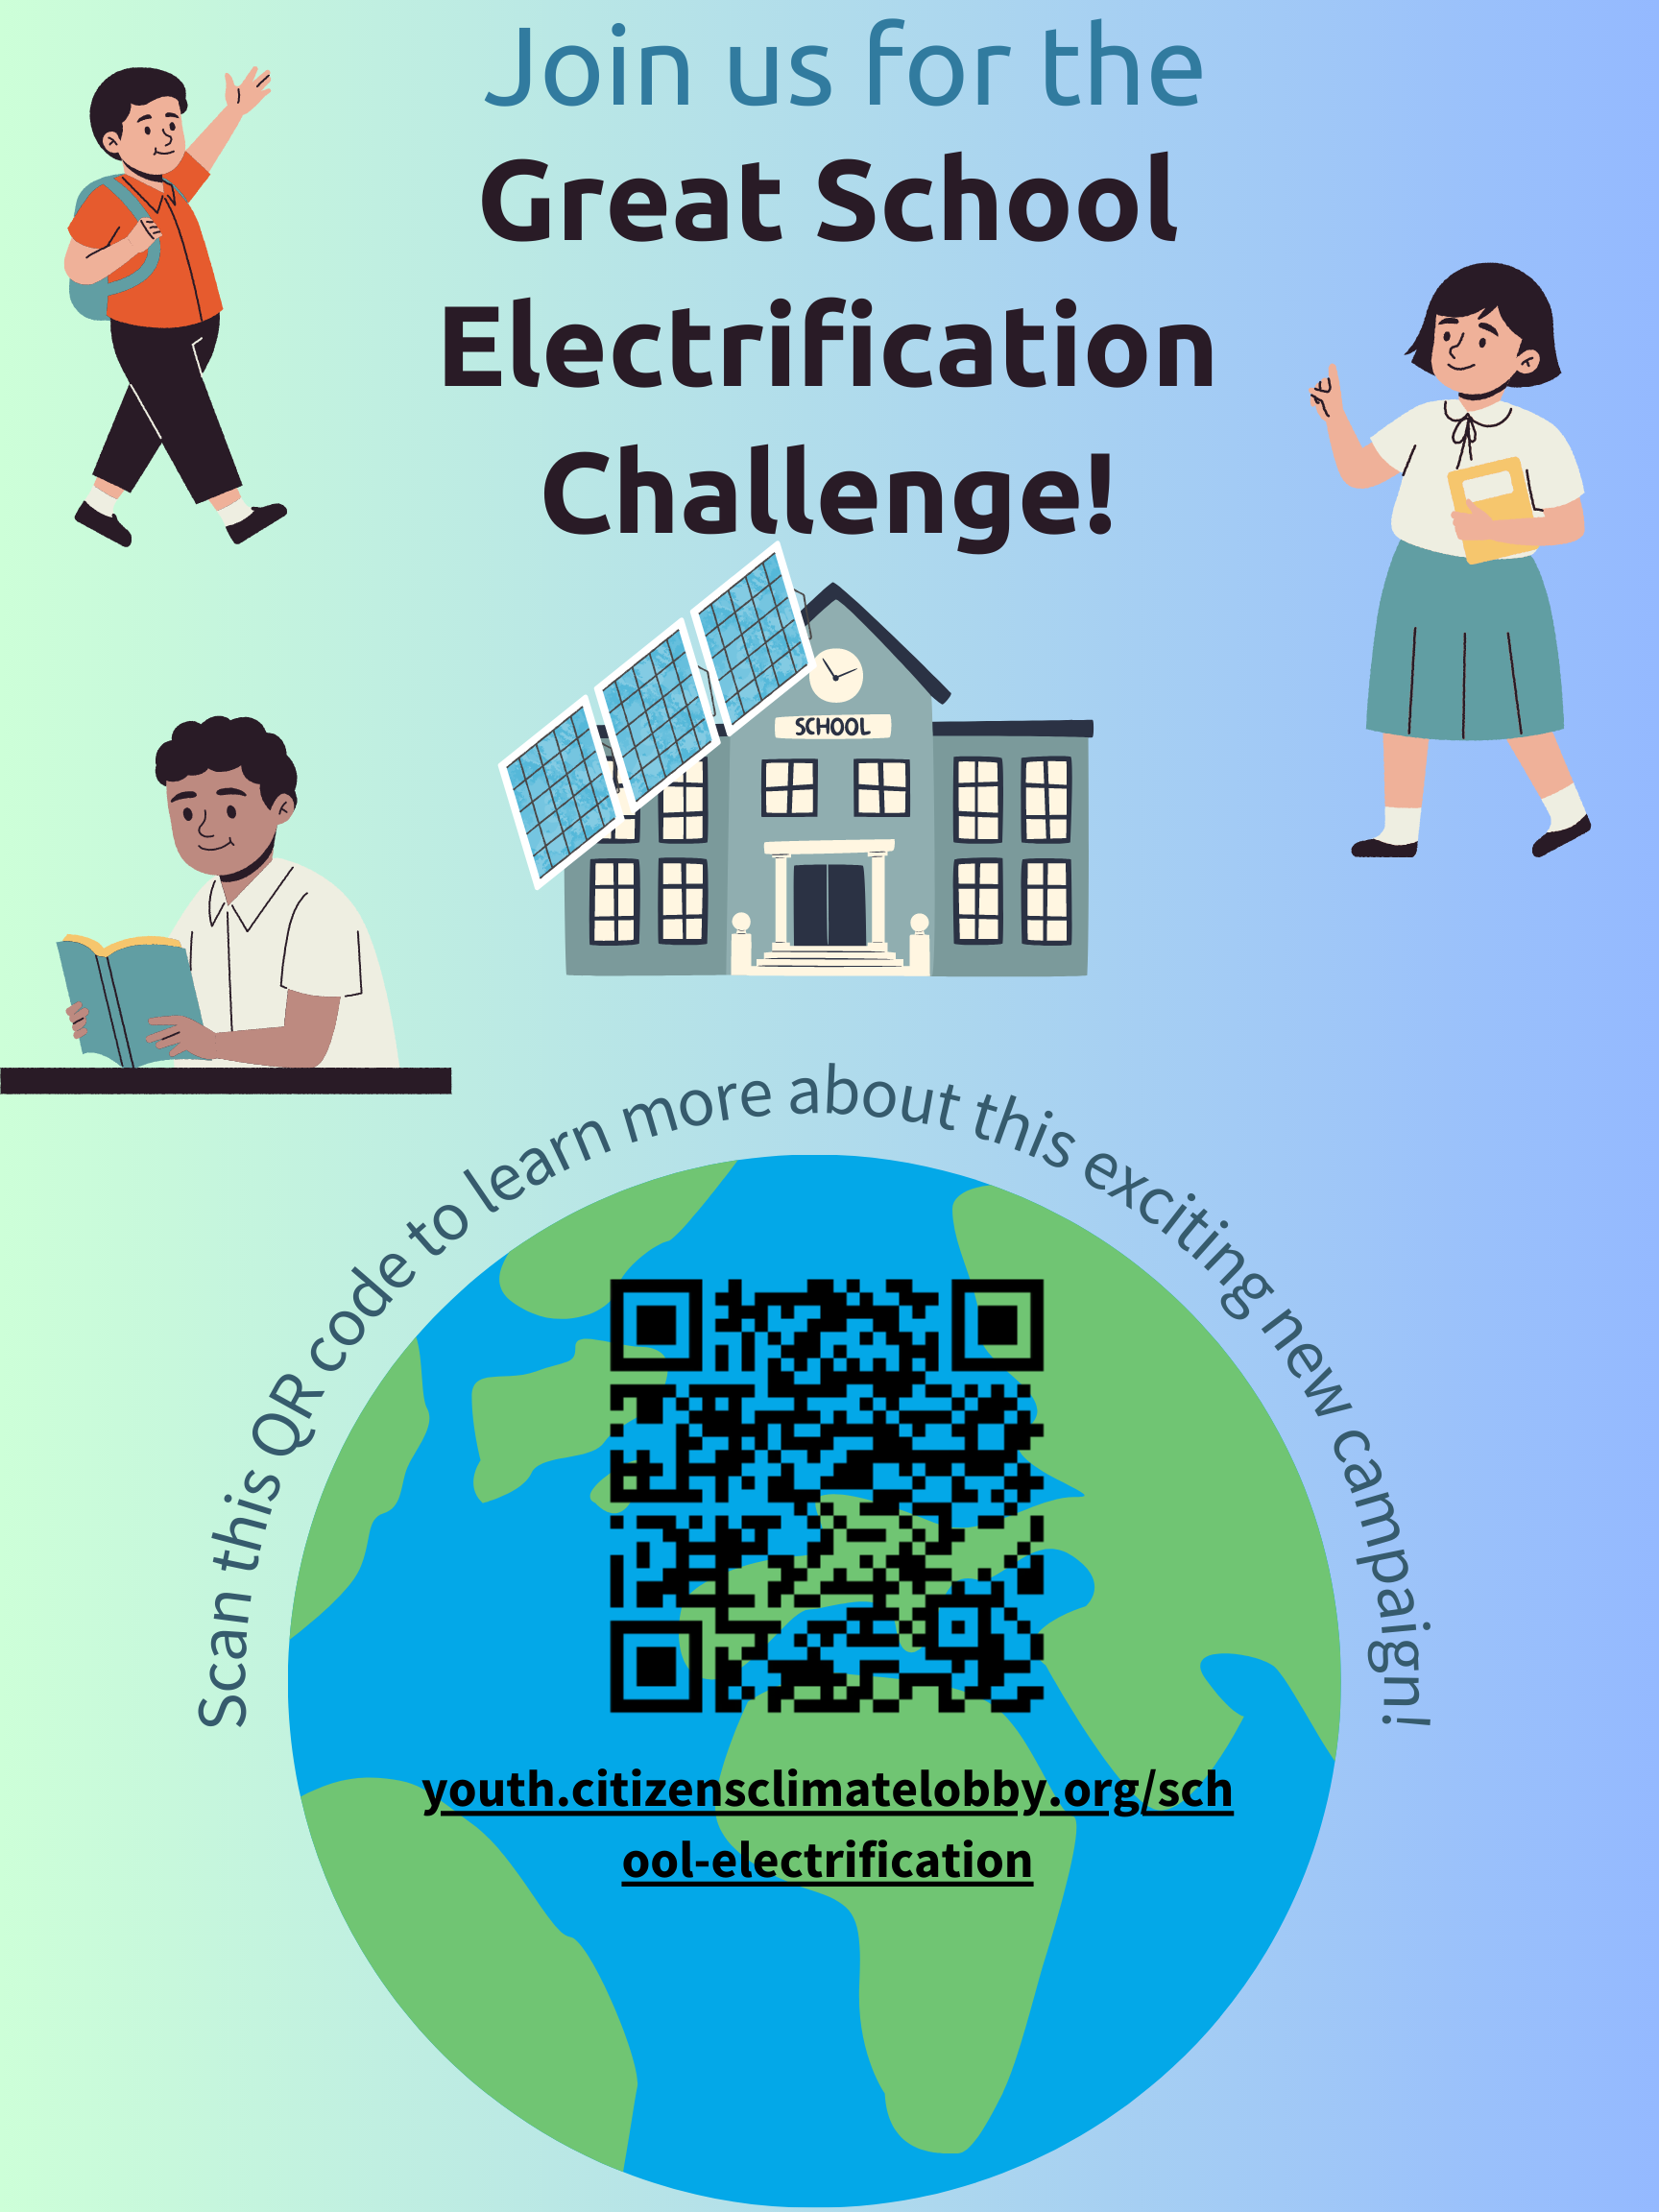 The Great School Electrification Challenge Poster with QR code to information. Graphics of students, a school, and earth can be seen in a blue and green background gradient